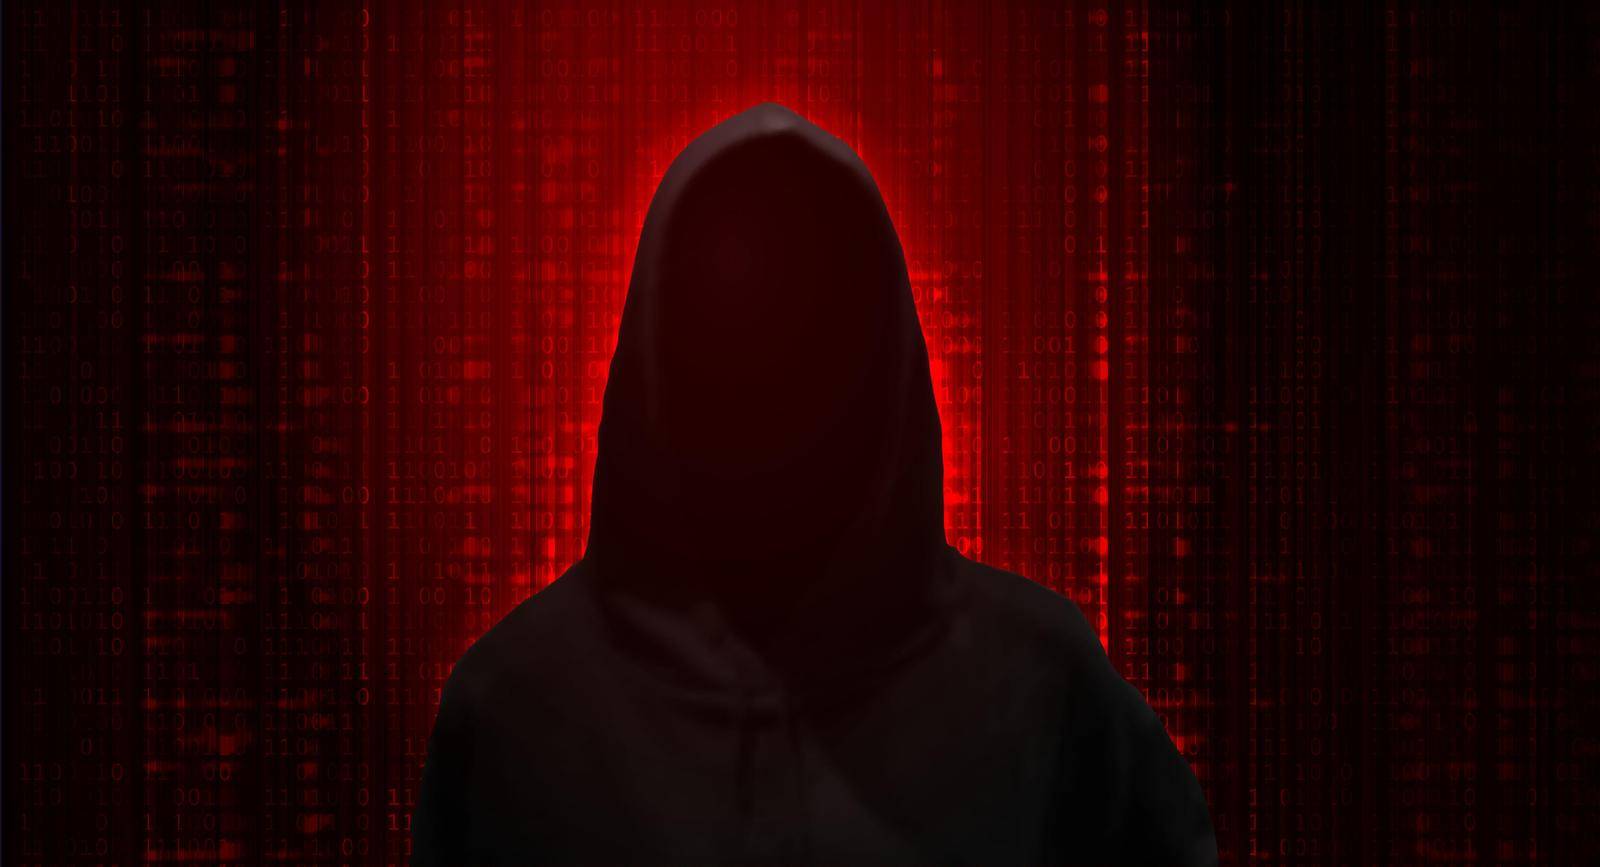 Spy agent, hacker. Mysterious man on dark red background by Whatawin